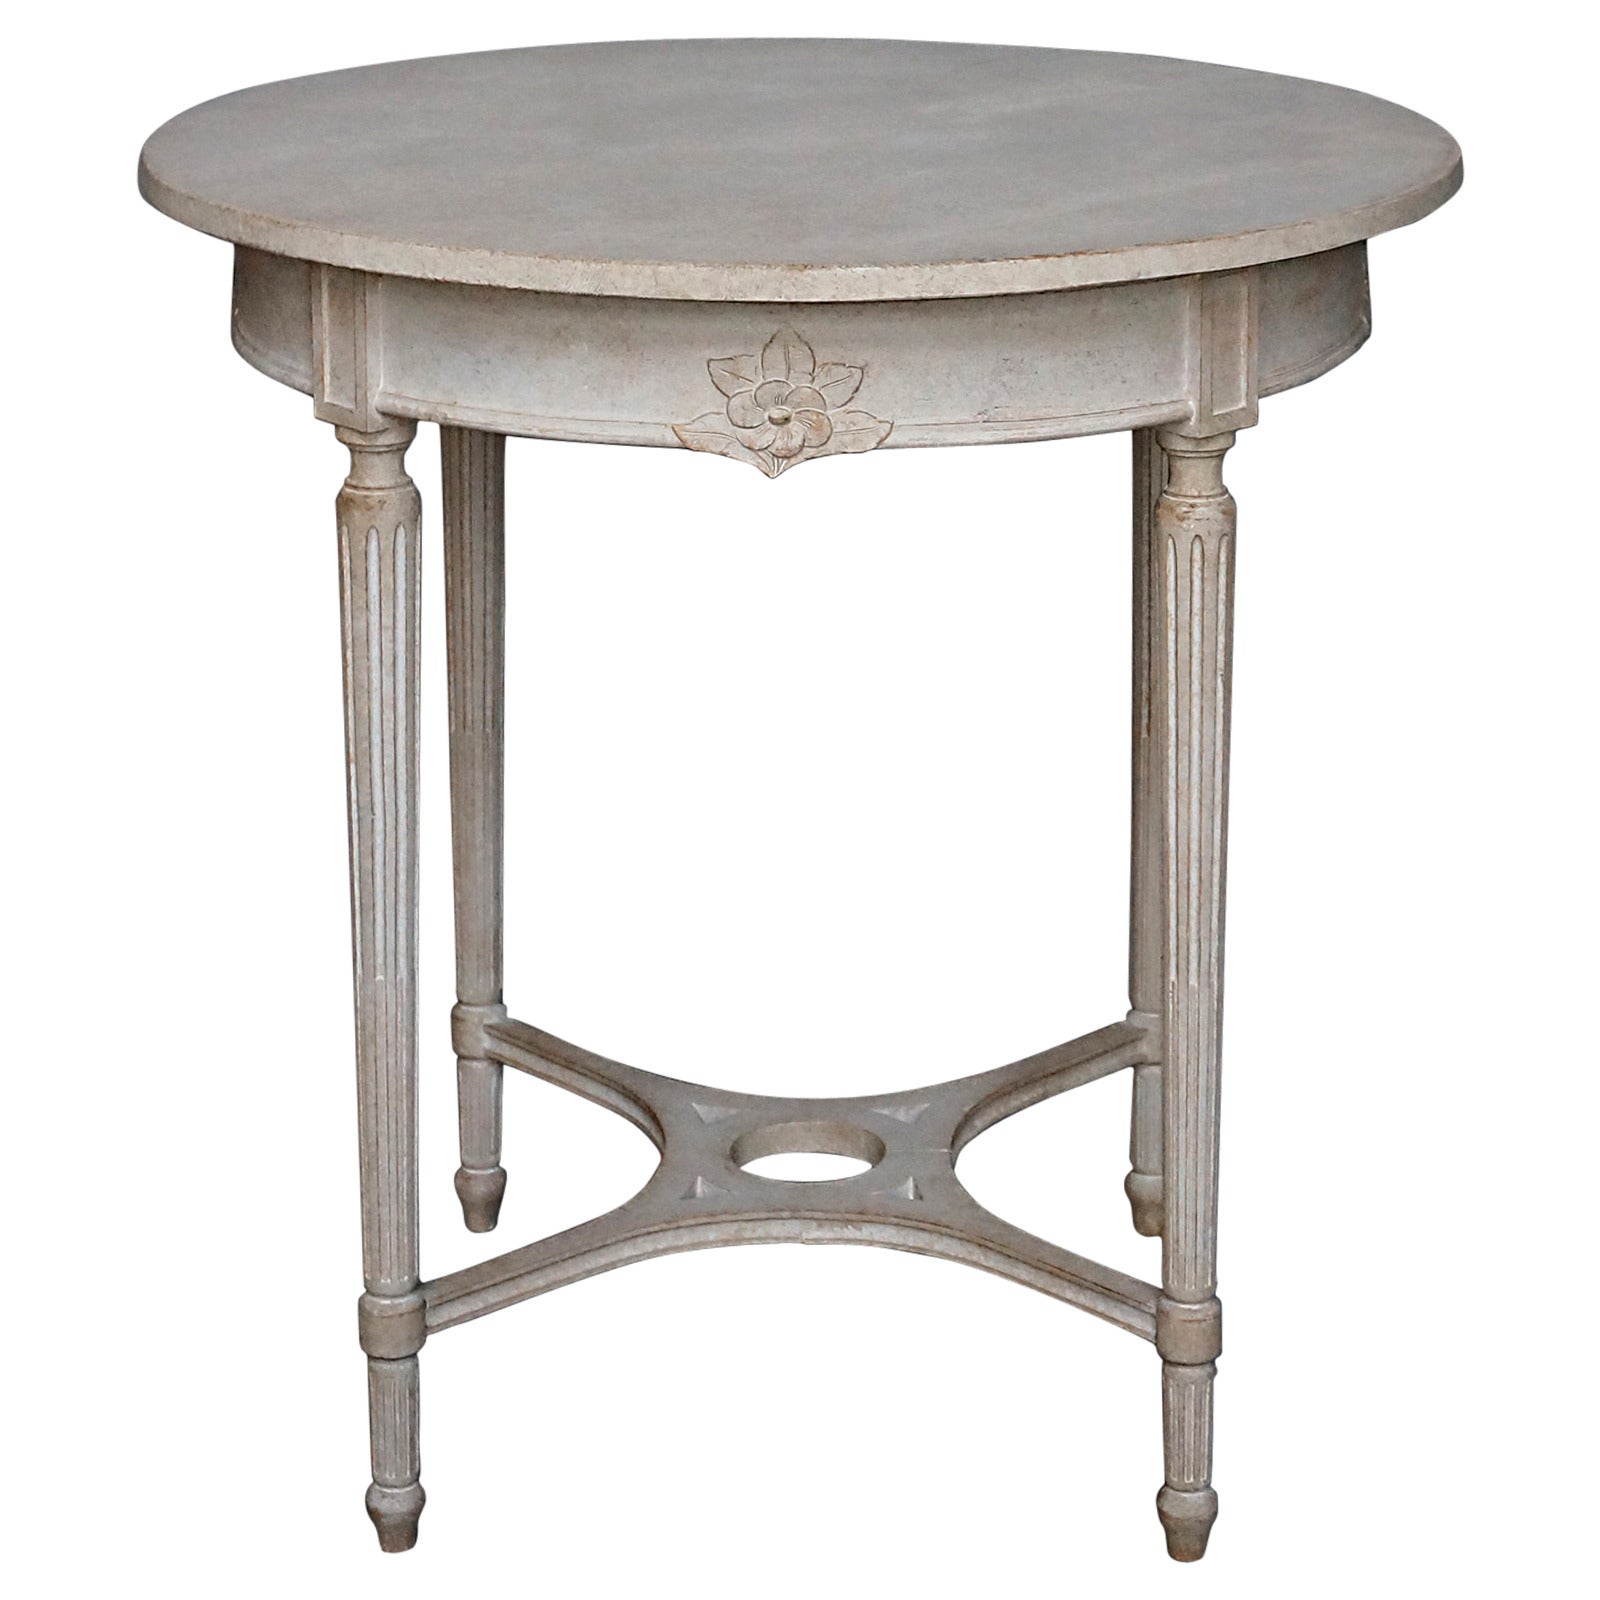 Swedish Side Table with Floral Detail